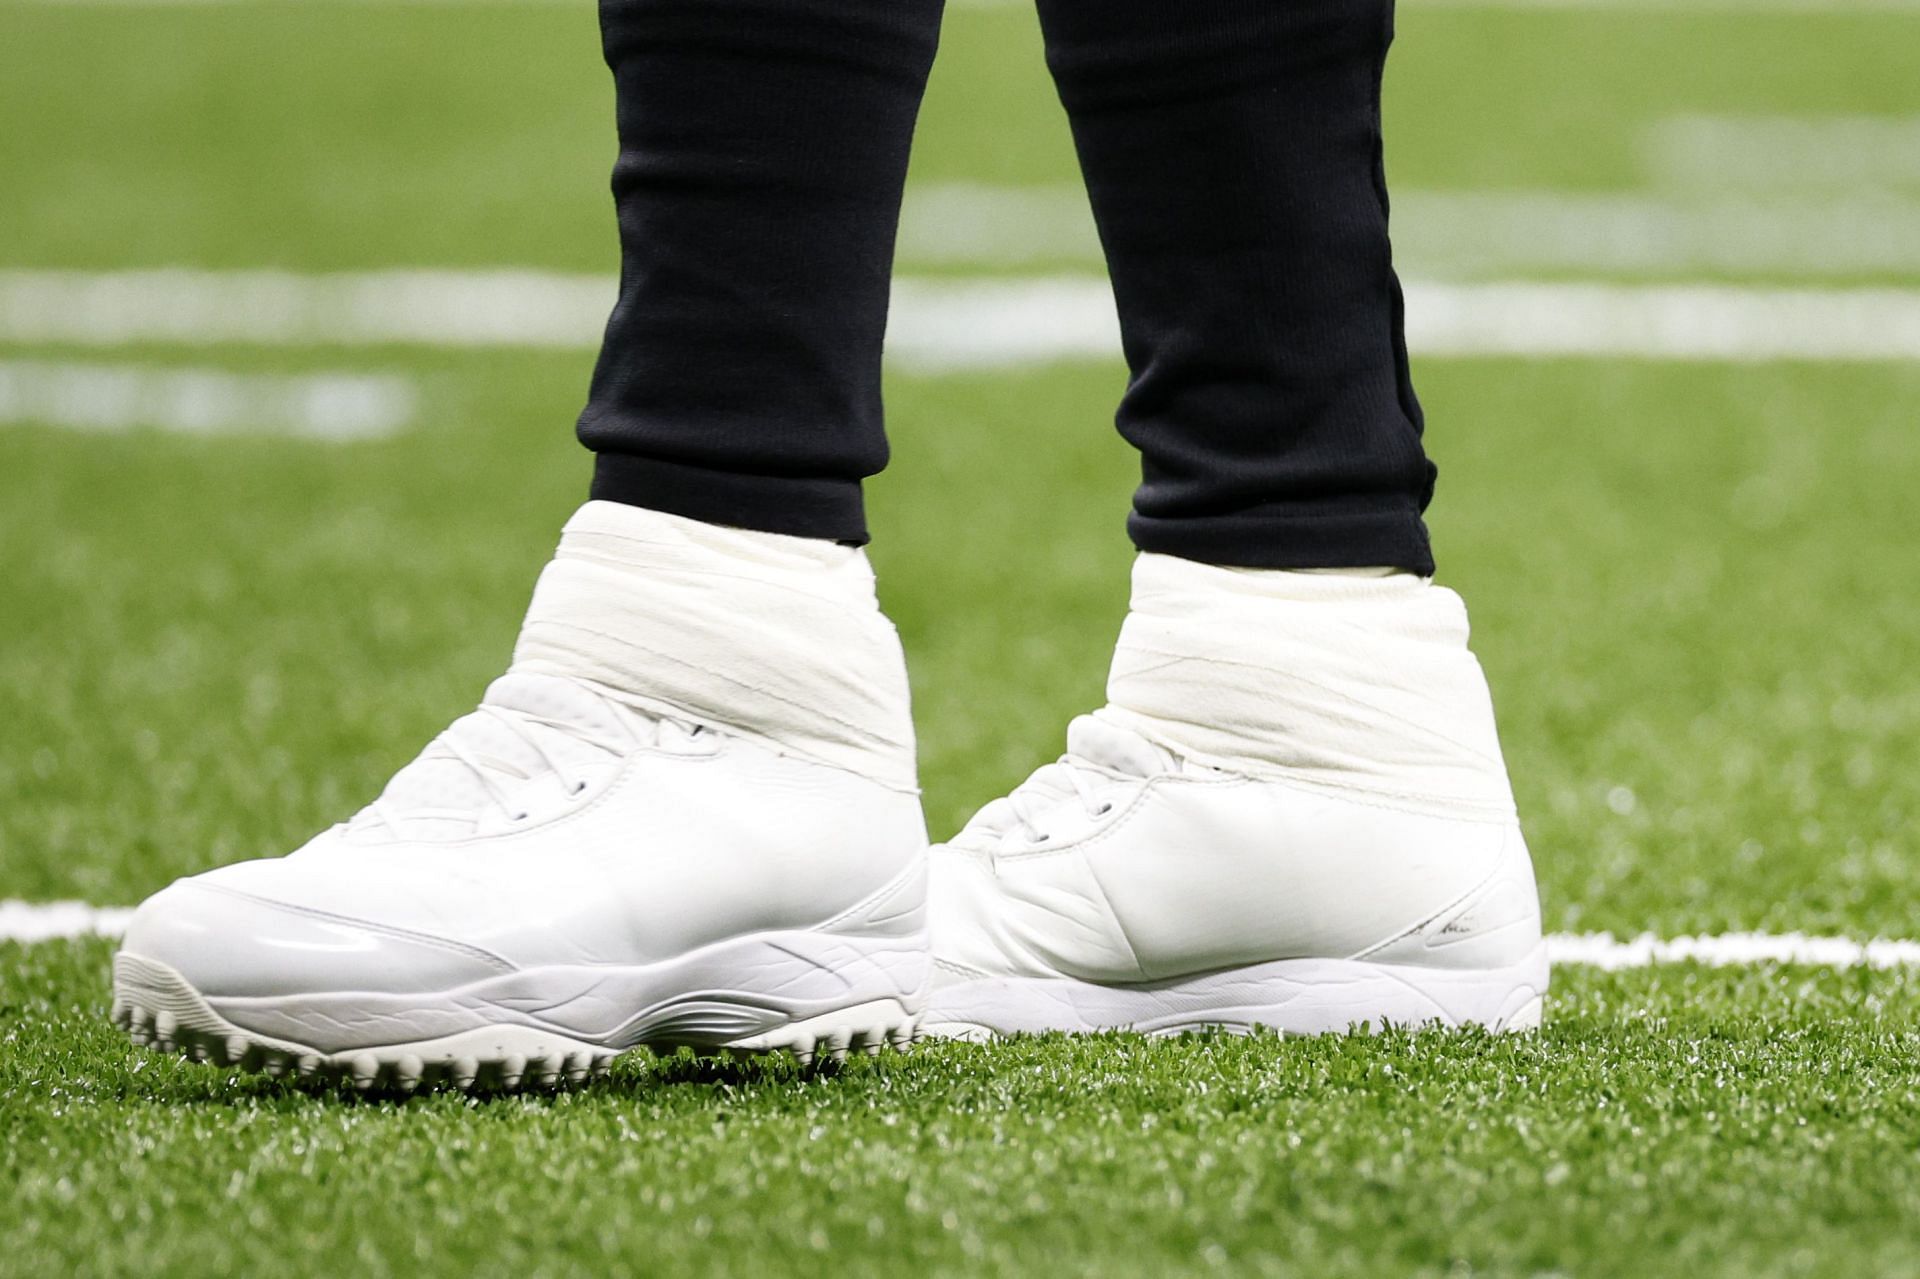 Does Tom Brady Have a Shoe Deal?